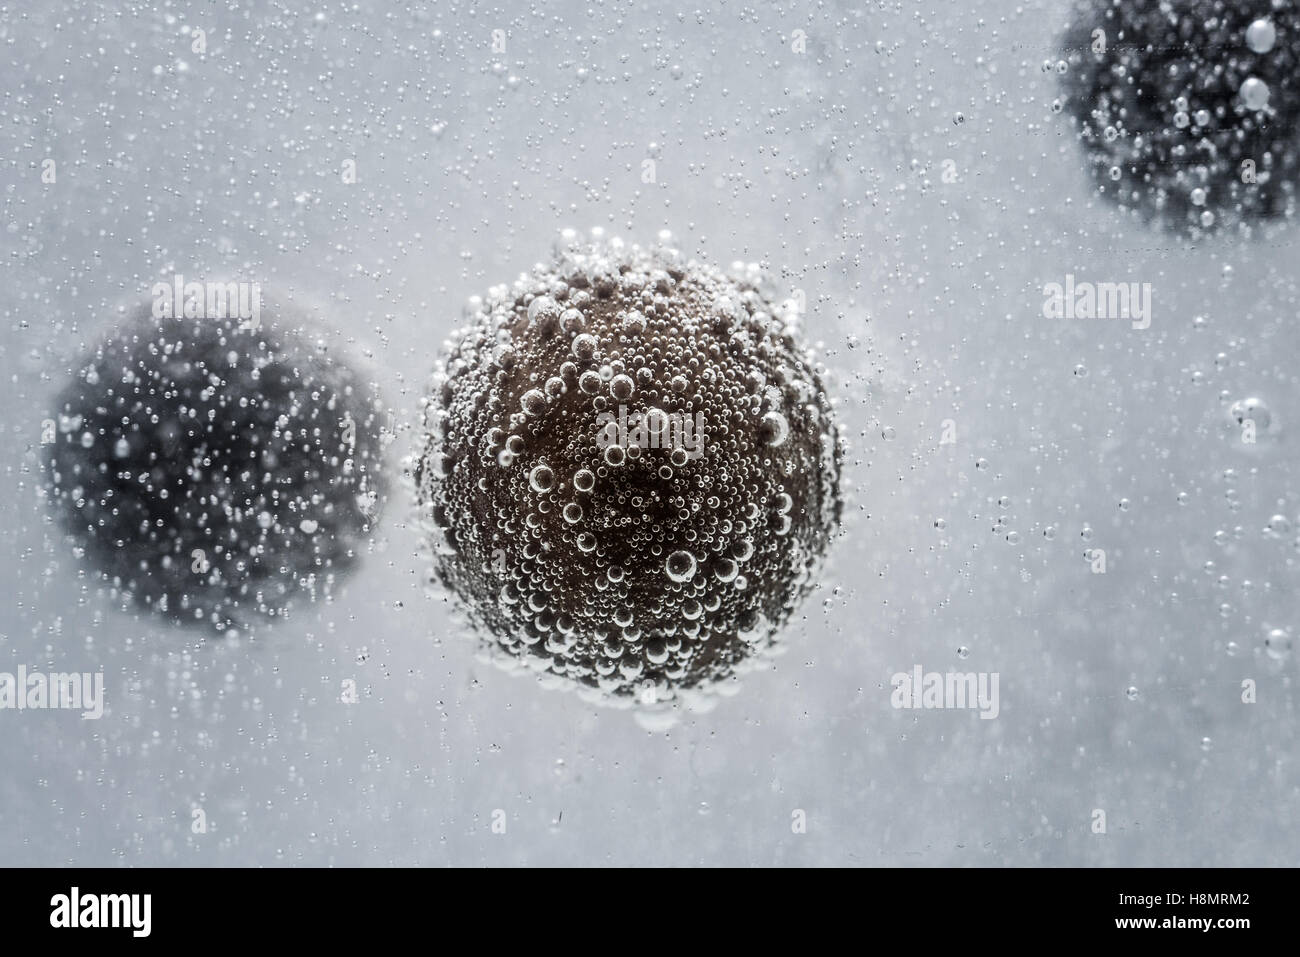 round chocolate in the water with bubbles. seamless texture Stock Photo